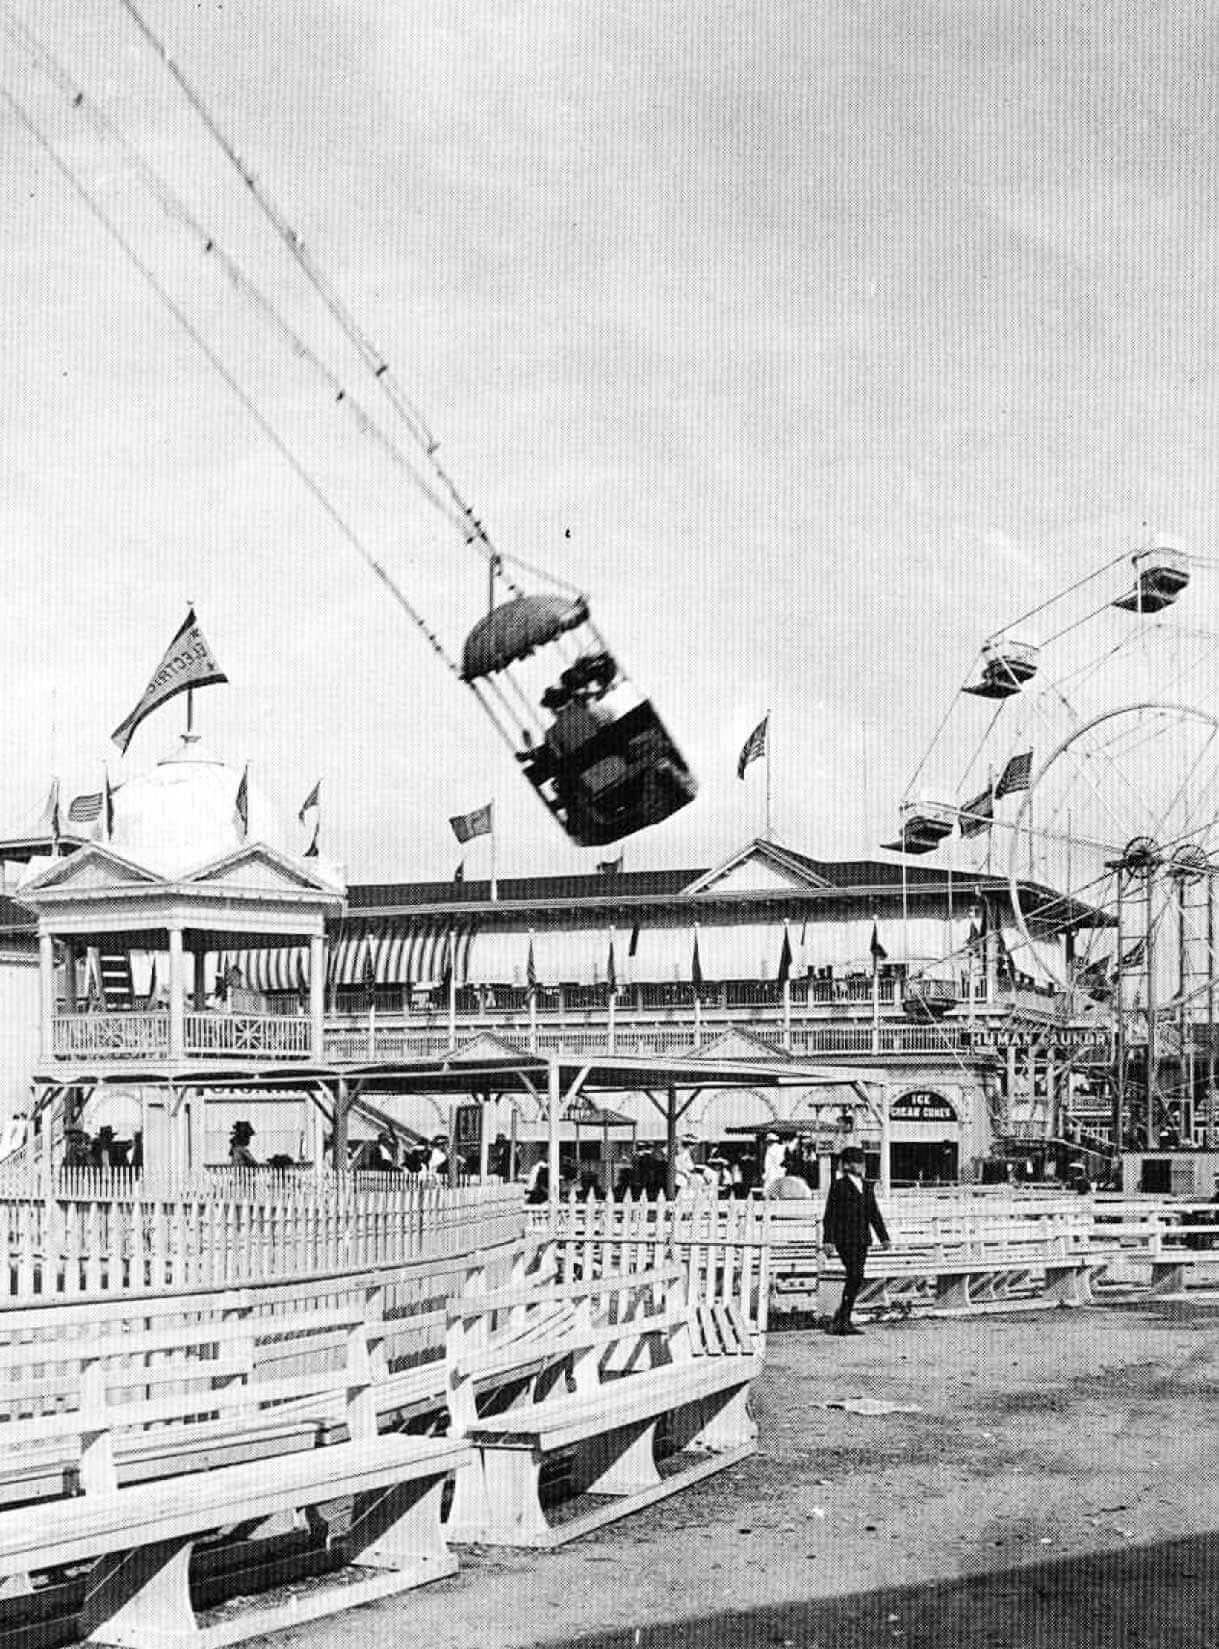 old photo of the pleasure pier history - 1920s